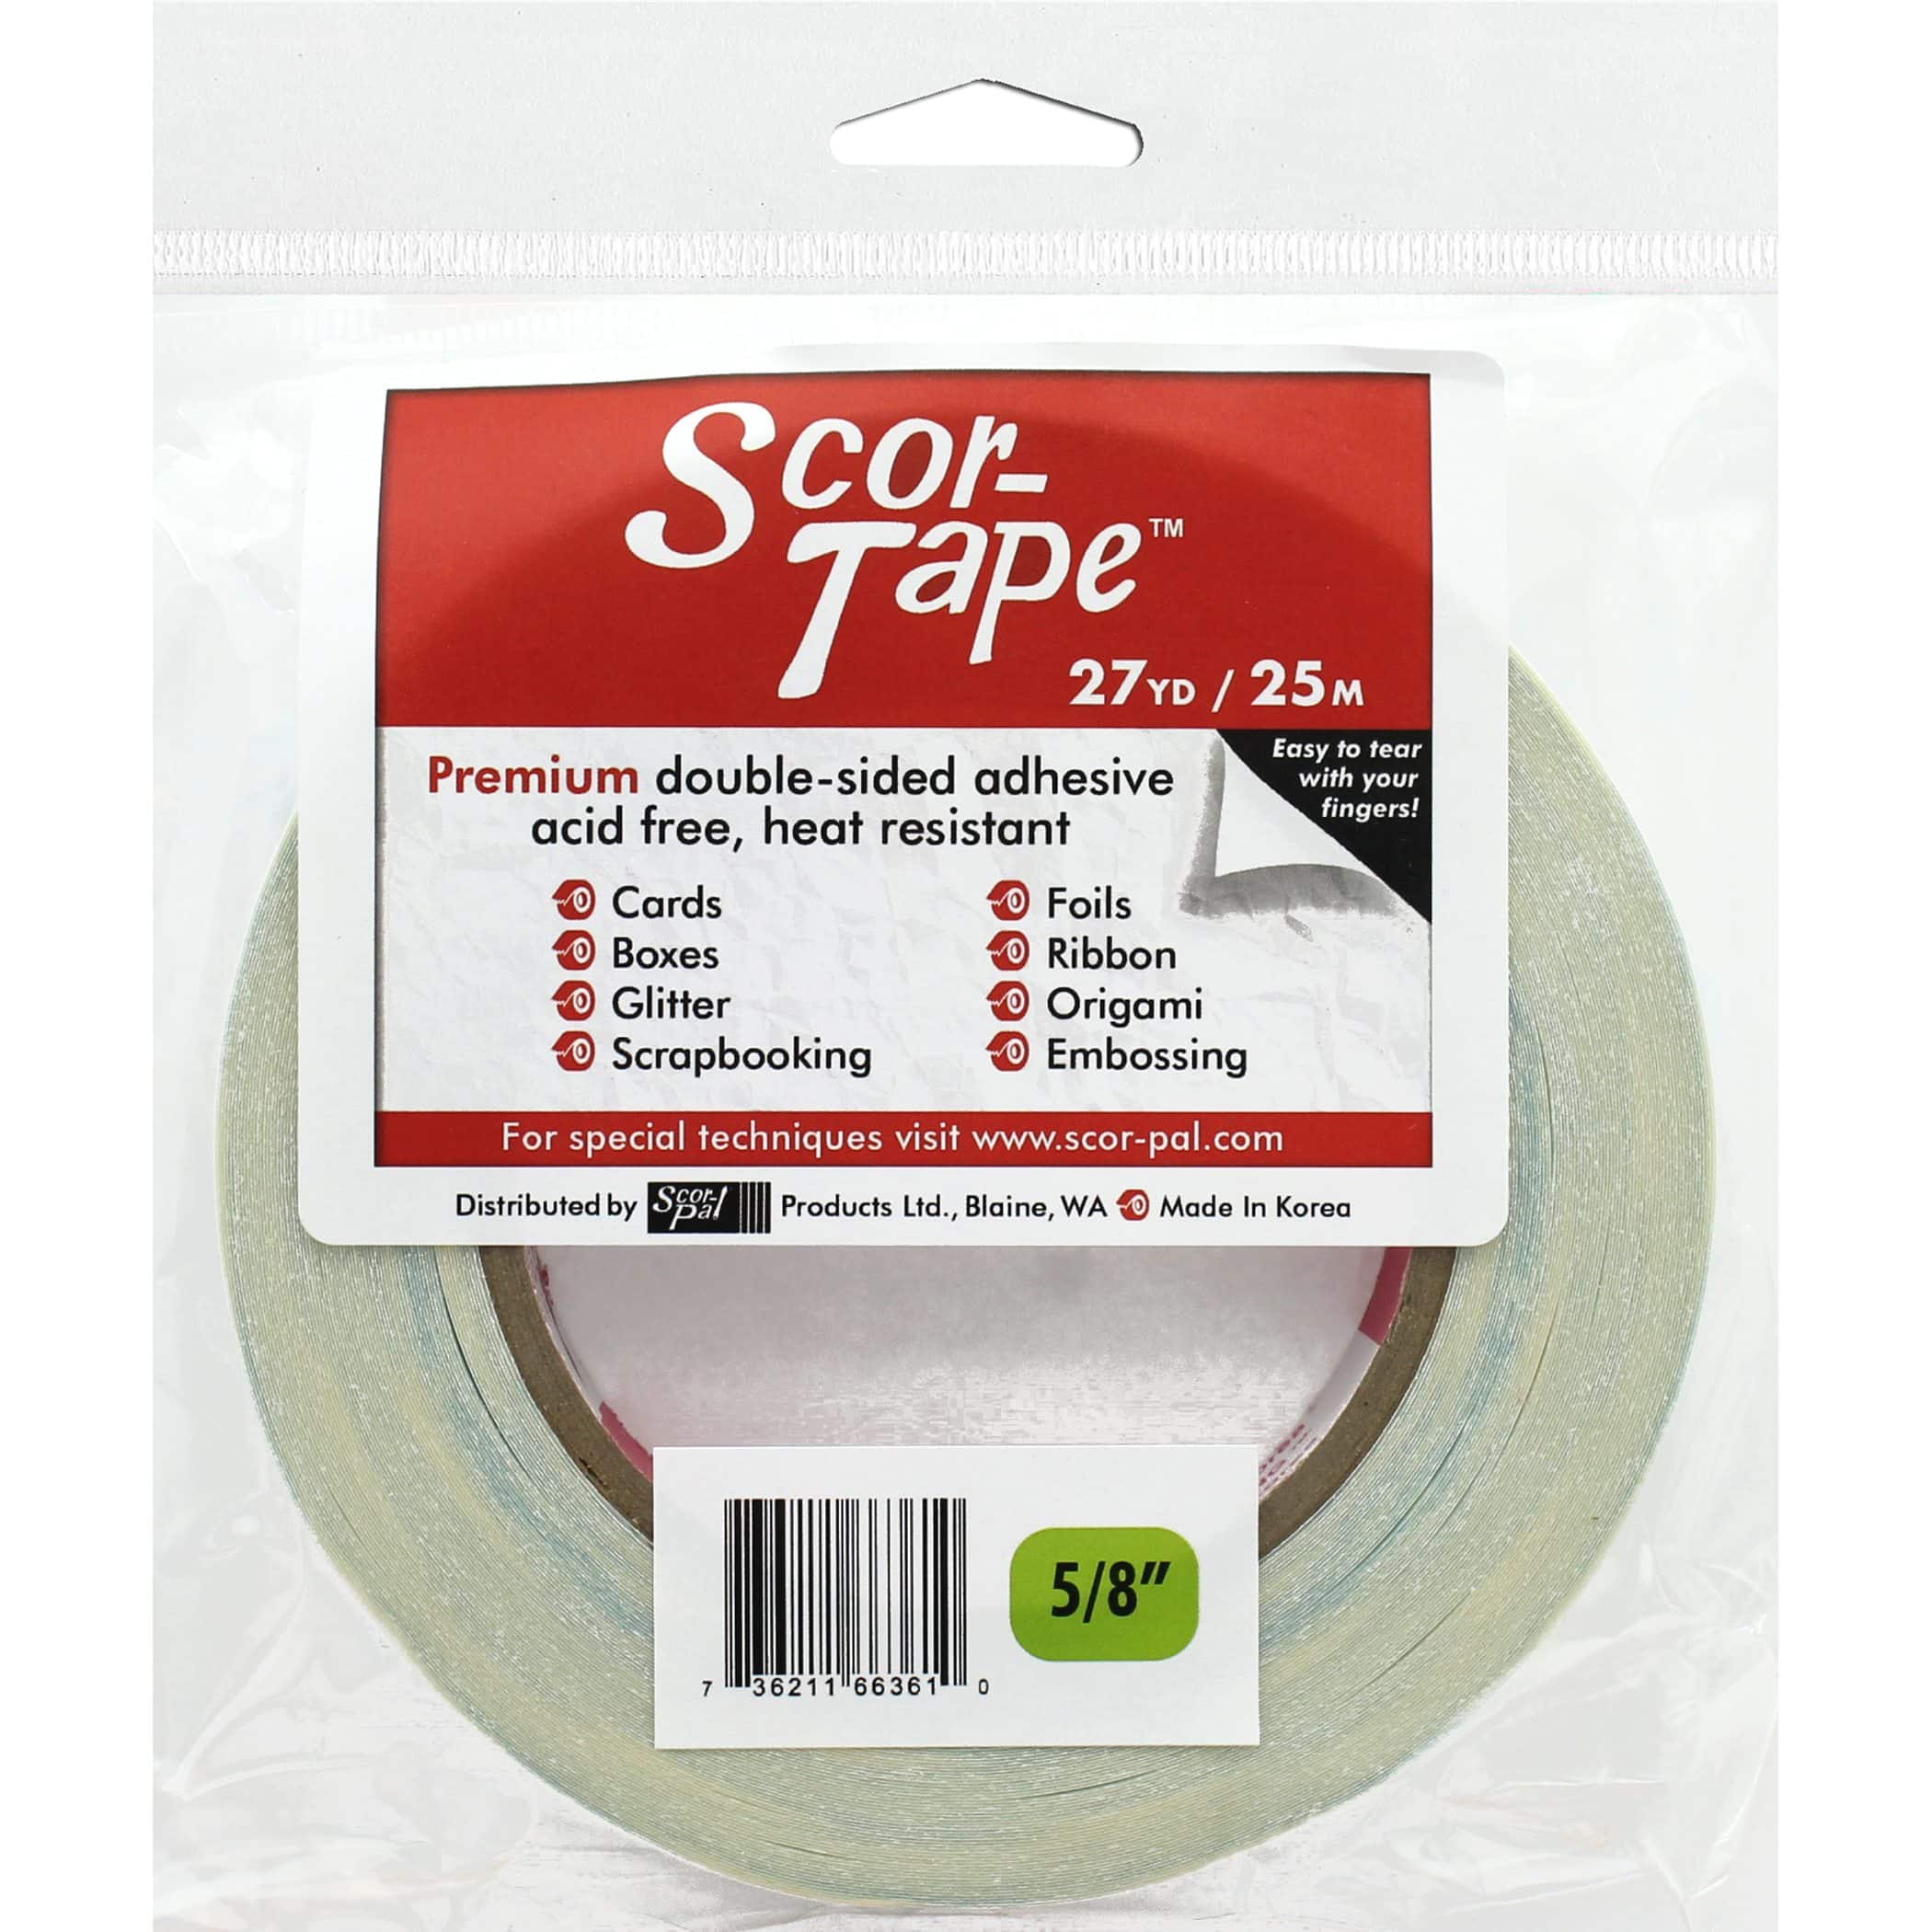 BULK 10 of Scor-Tape Adhesive 1/8 x 27yd by Scor-Pal - Value! FREE  Shipping!!